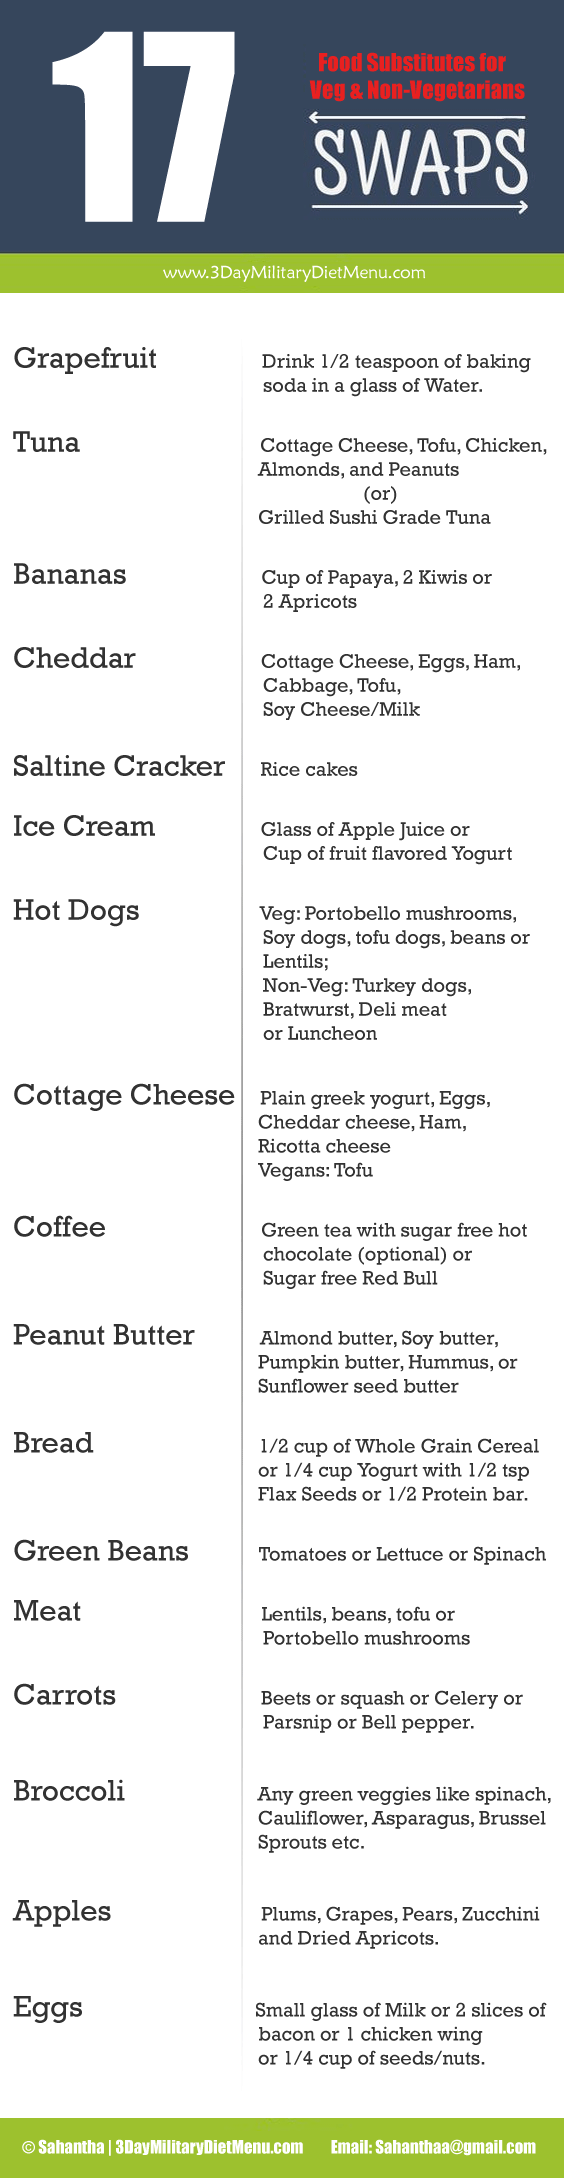 Military Diet Substitutions Find The List Of Food 